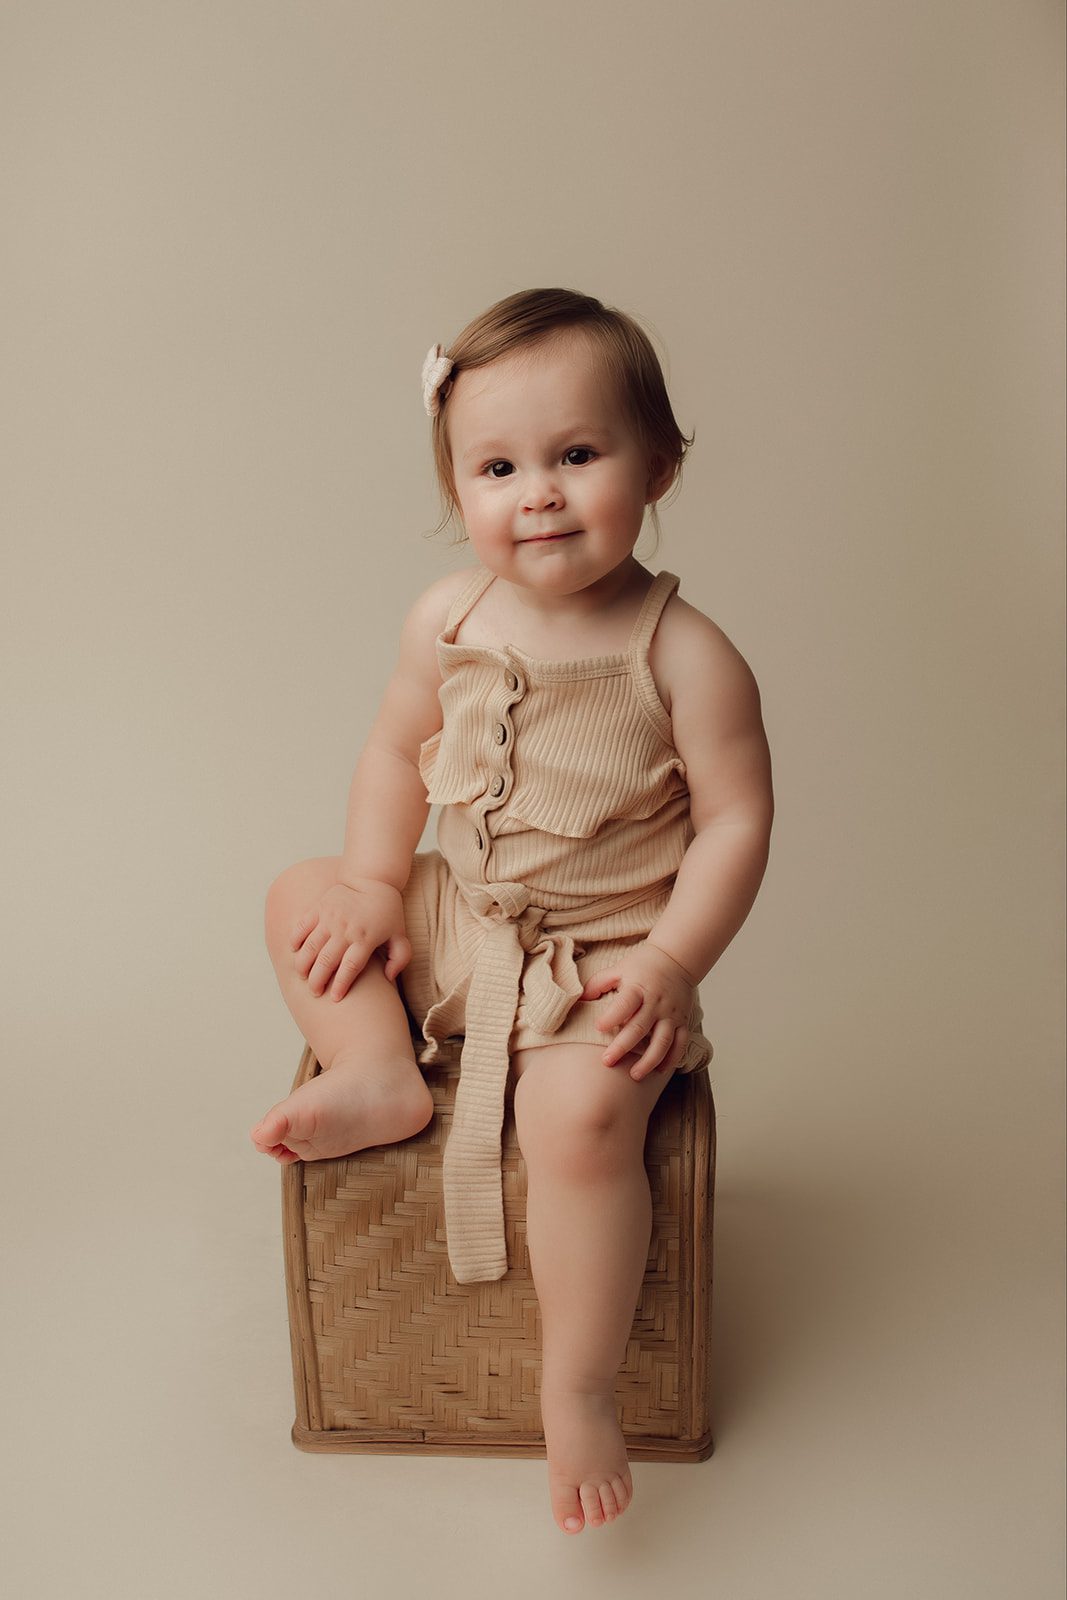 A toddler girl in a beige dress sits on a wicker box in a studio after visiting Healthy Baby Network